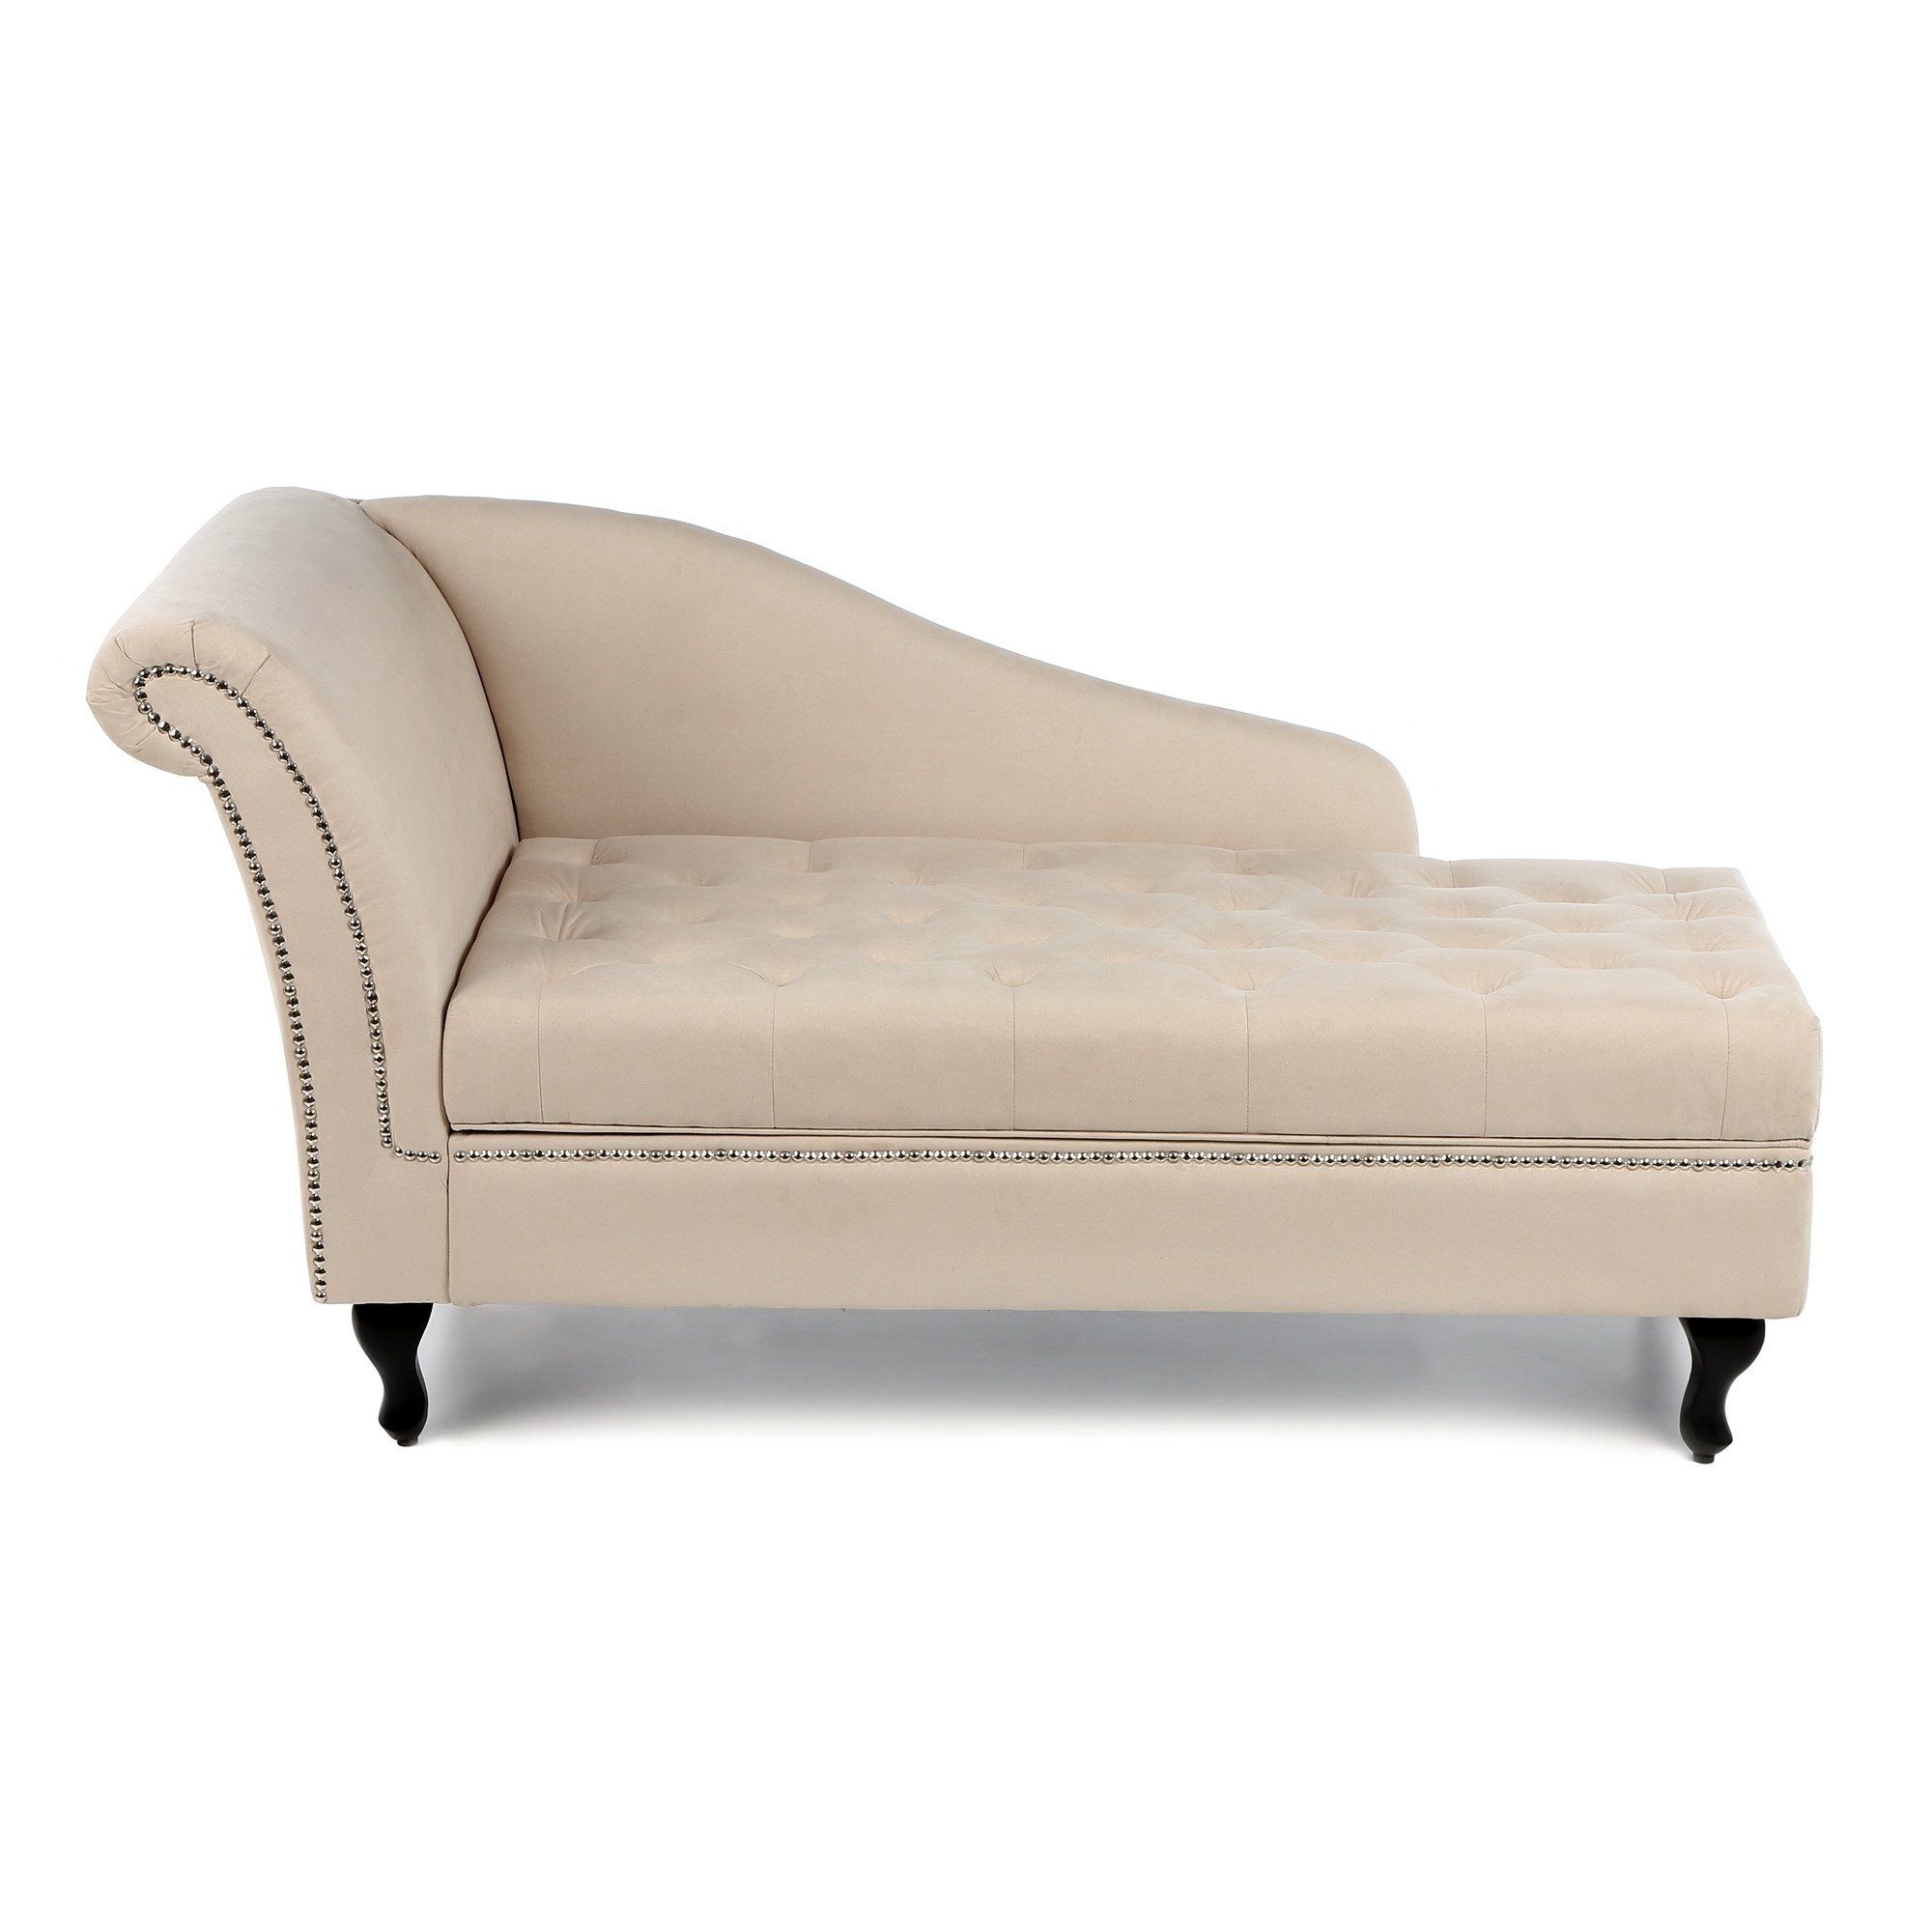 $300 Amazon – Storage Chaise Lounge Luxurious Tufted Classic Intended For Most Recent Chaise Lounge Daybeds (Photo 6 of 15)